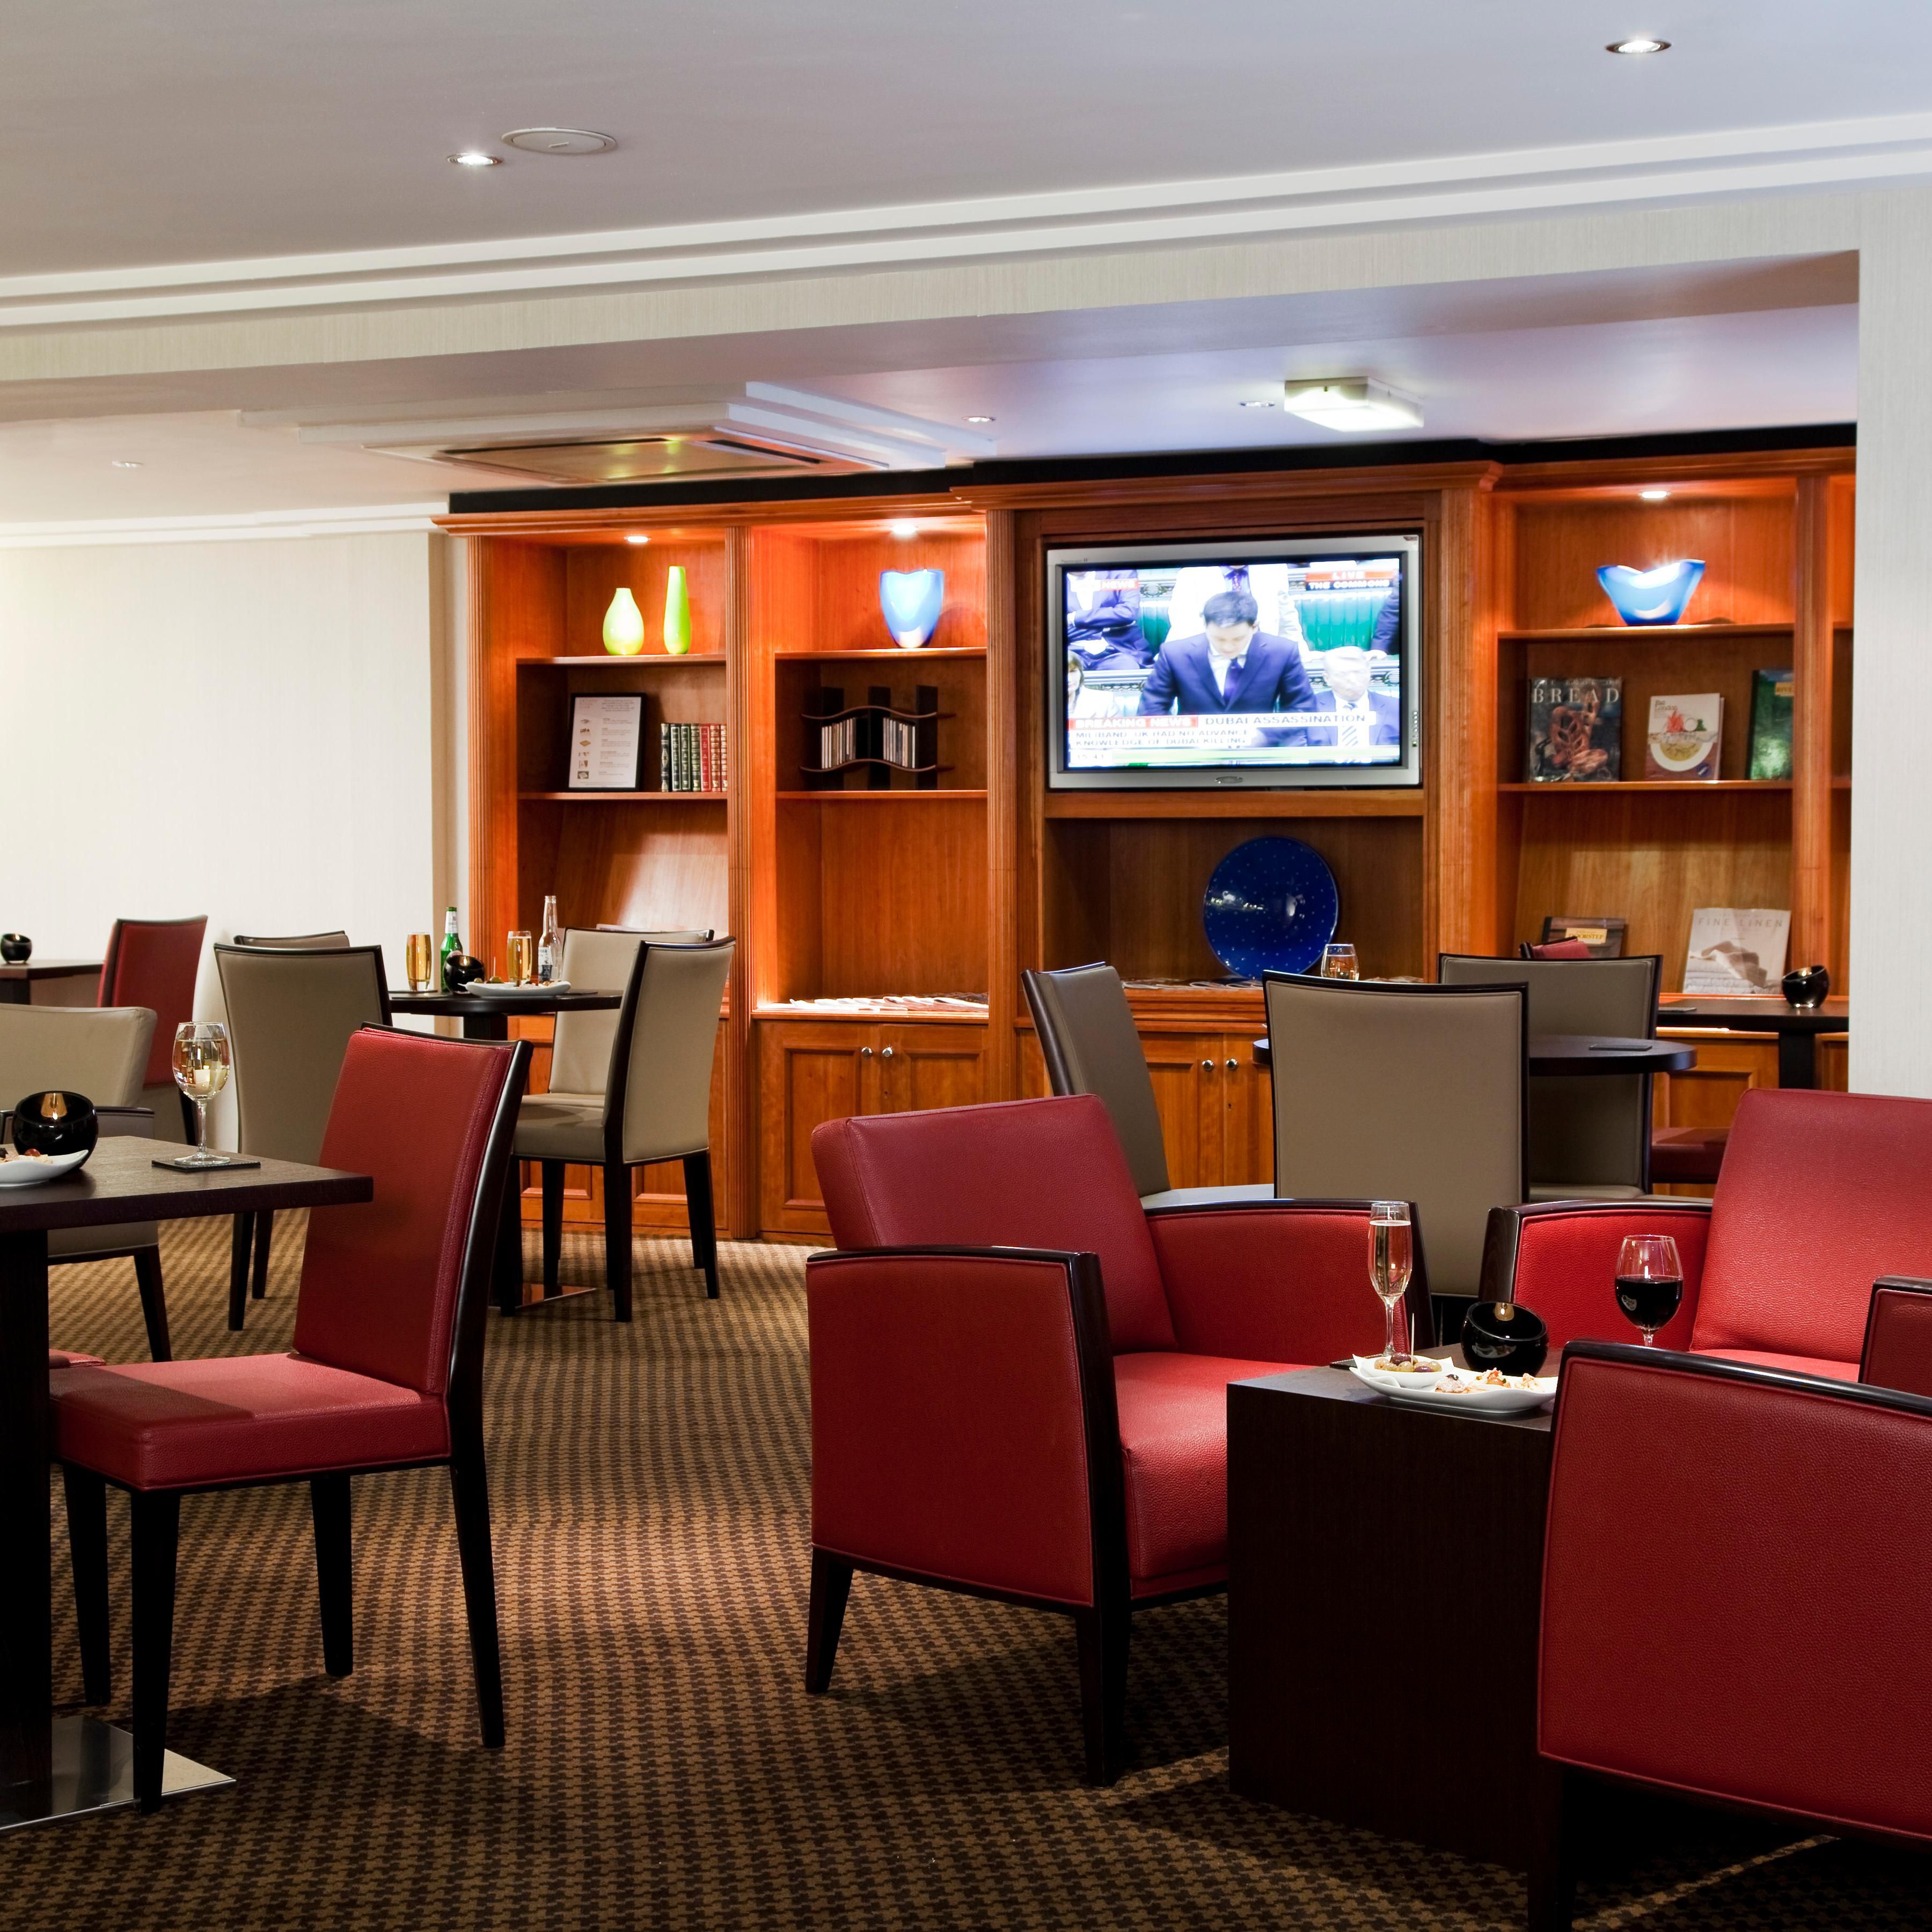 Large screen TV and international newspapers in Club Floor Lounge